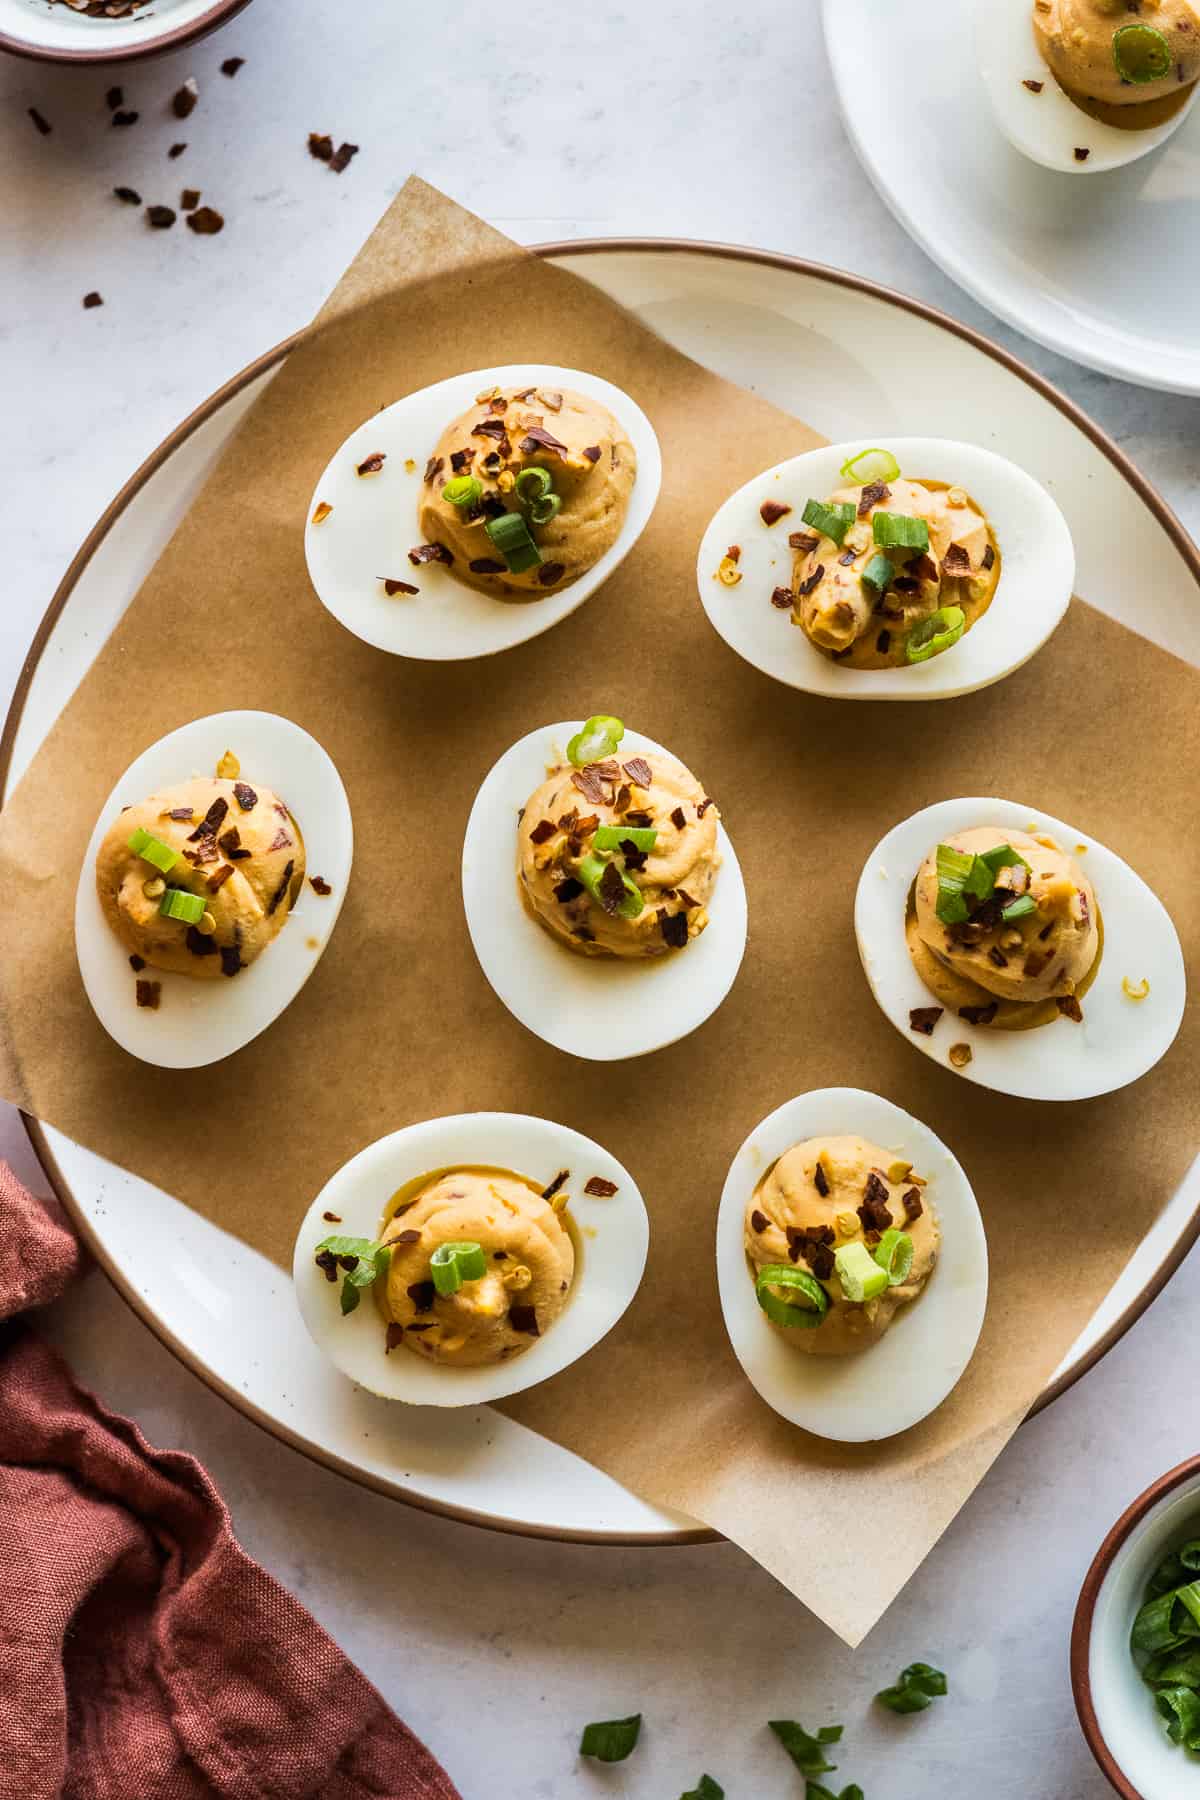 Spicy chipotle deviled eggs garnished with crushed red pepper flakes and green onions.